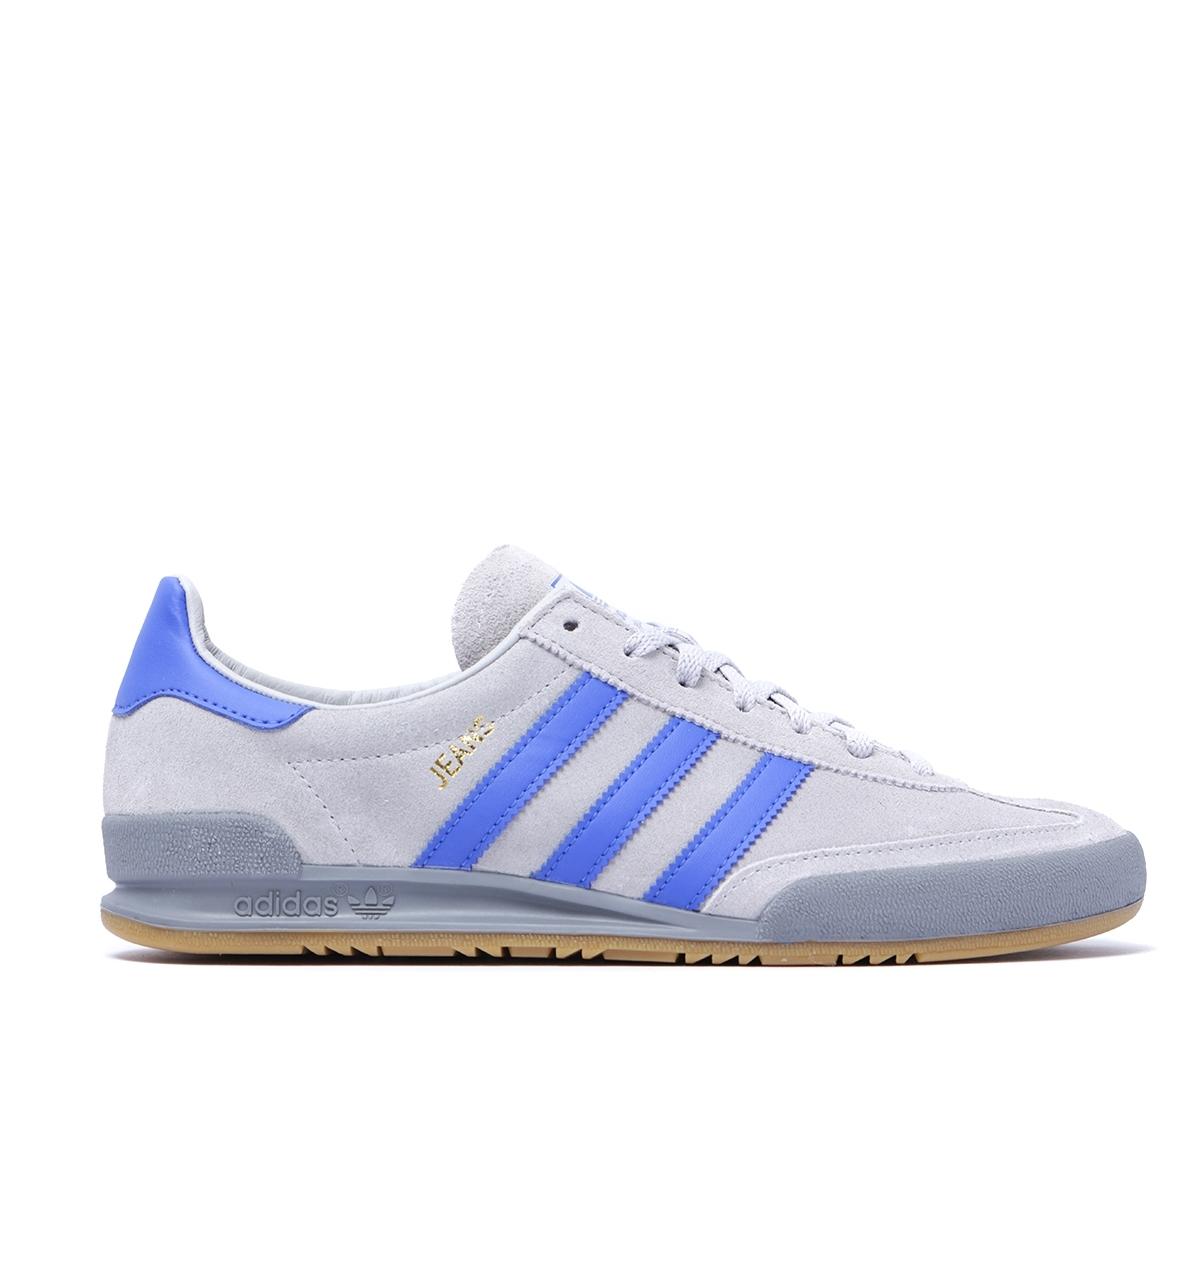 adidas Denim Stone Grey Blue Jeans Trainers in Gray for Men - Lyst